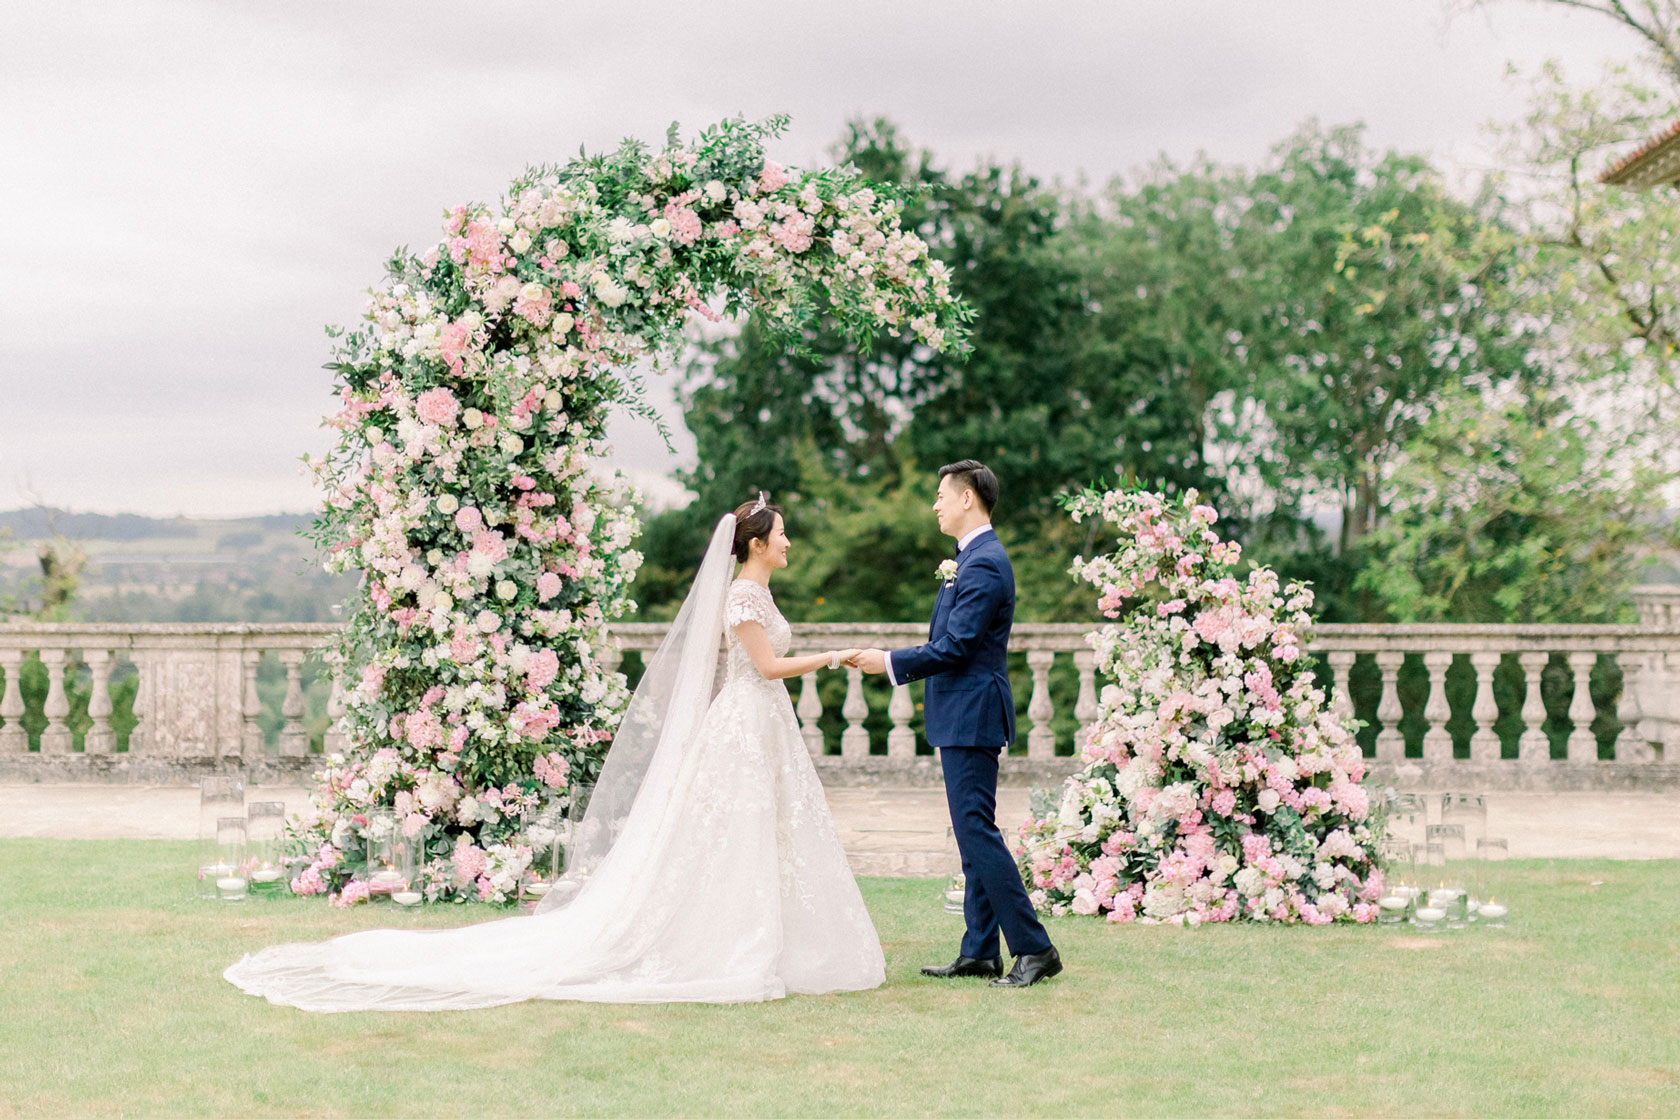 A Chinese bride and groom outside at Cliveden House getting married in front of a flower arch